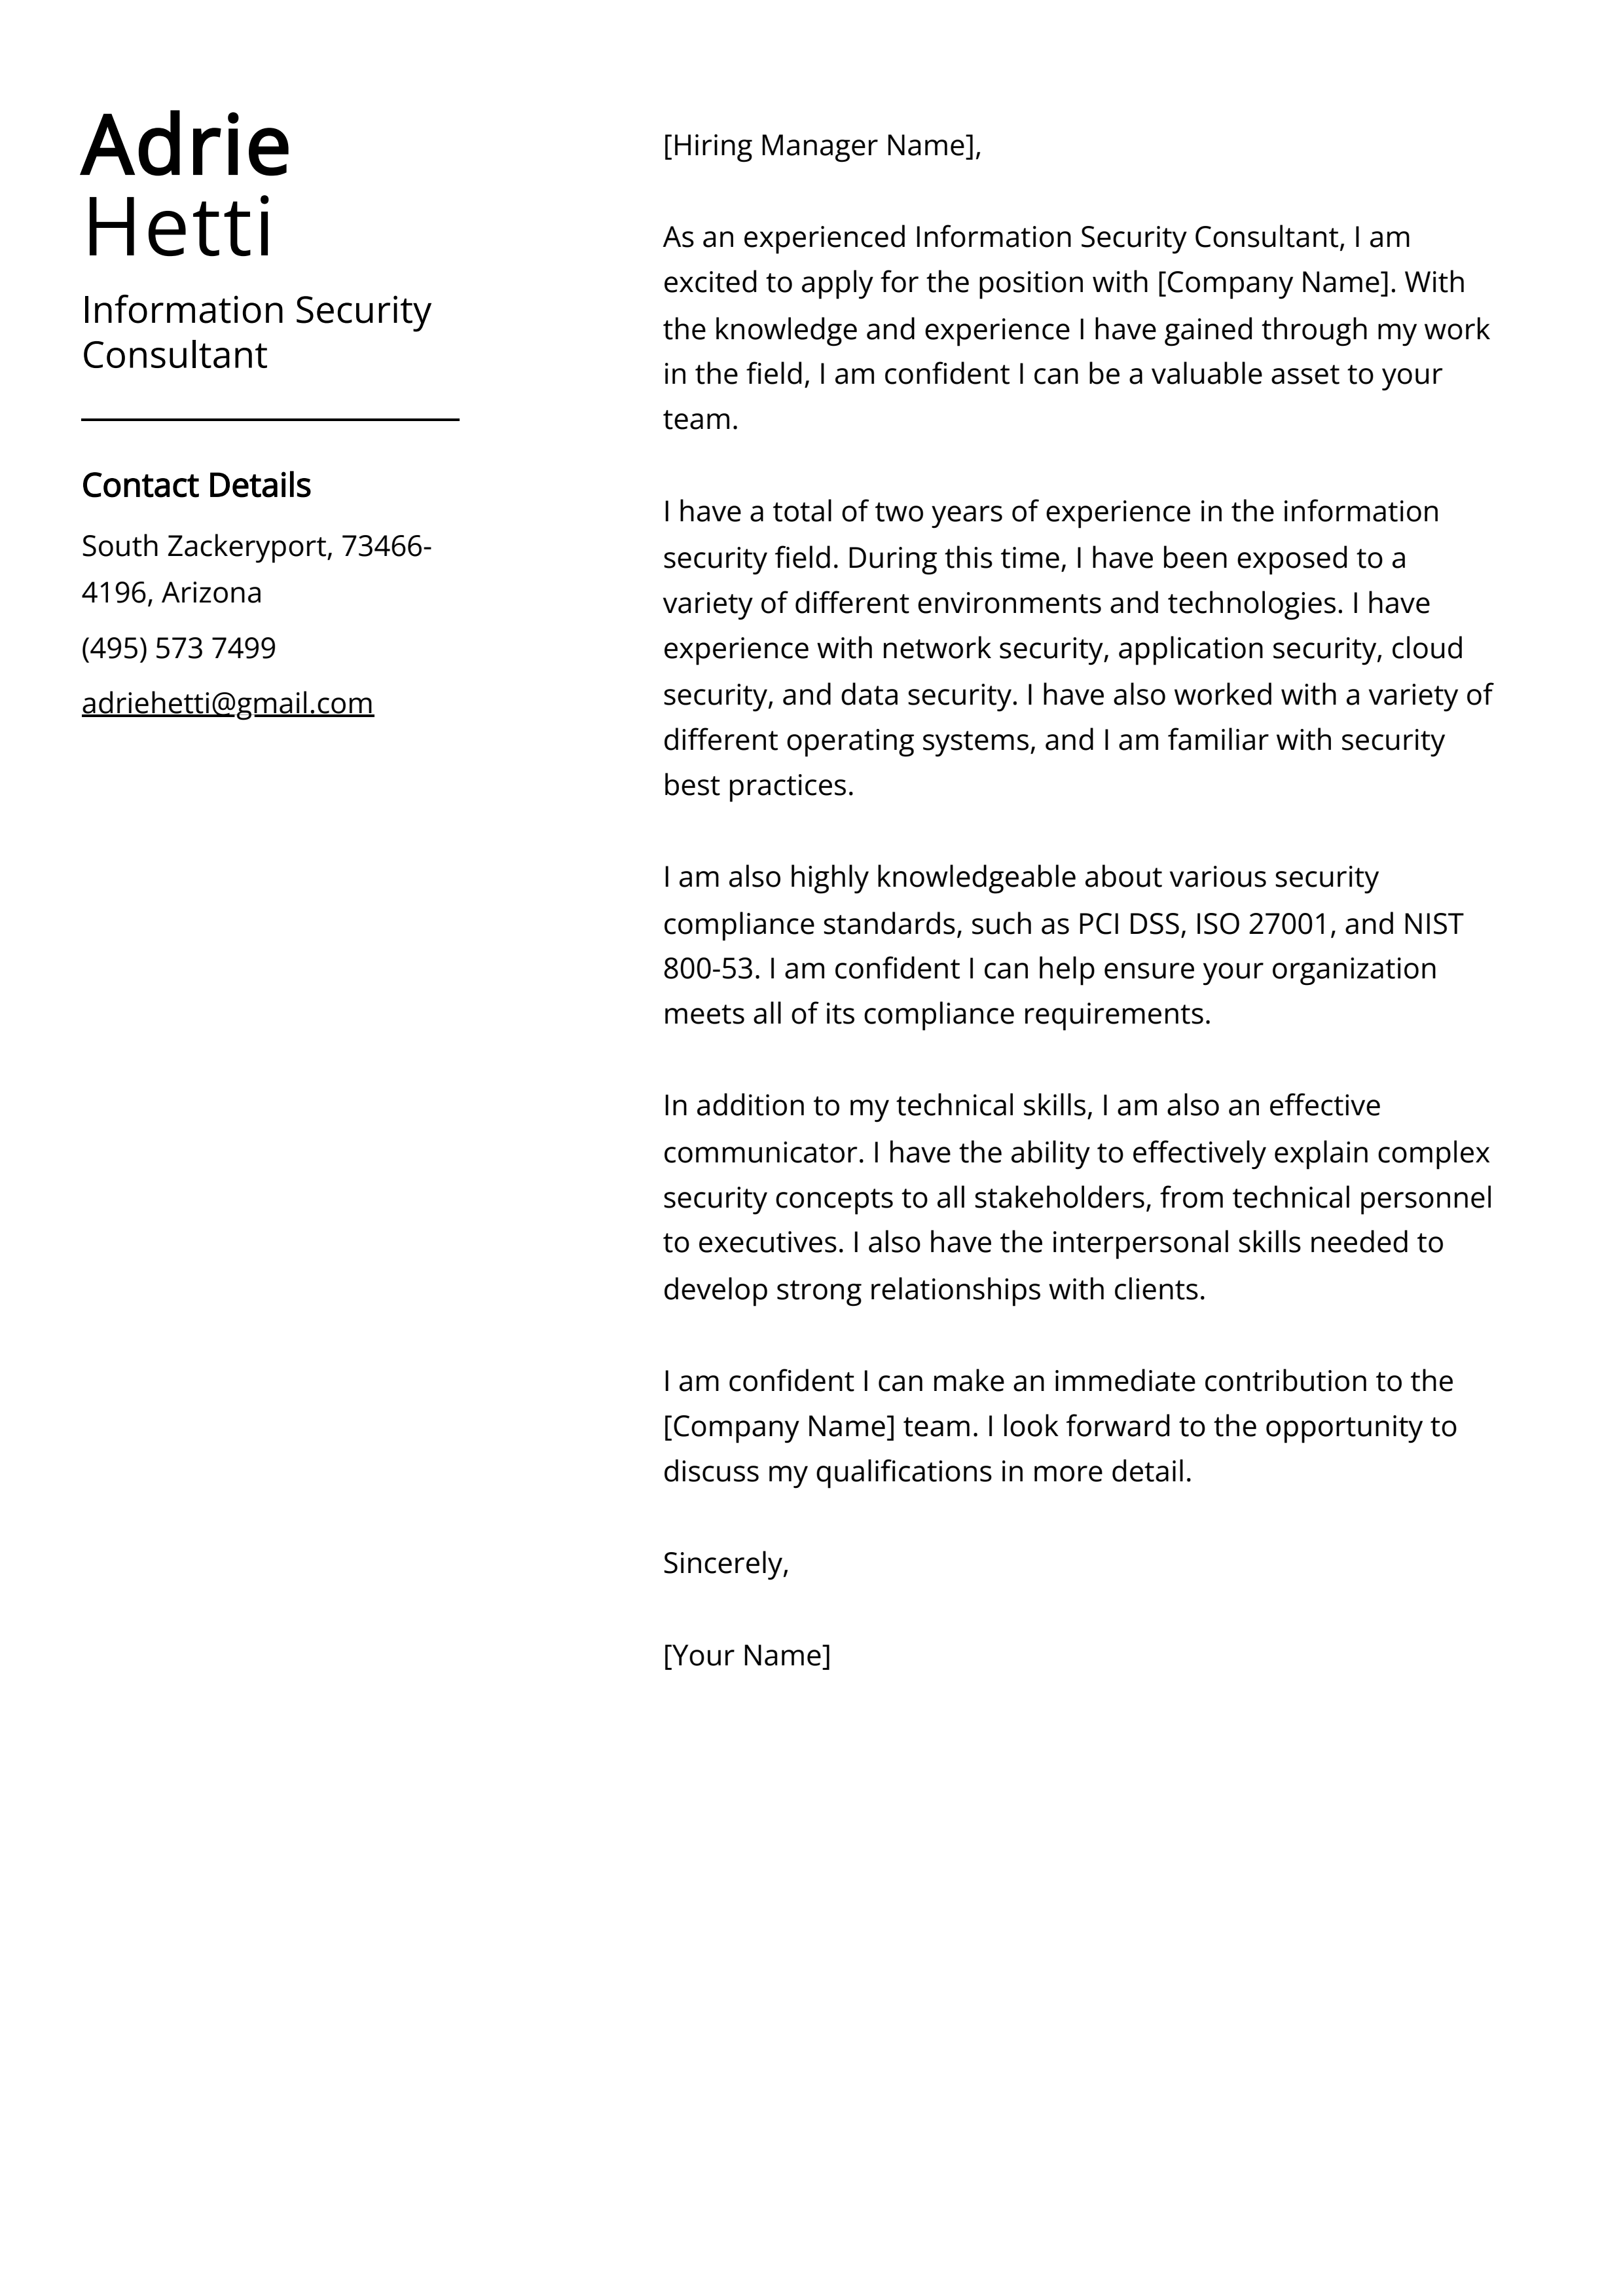 Information Security Consultant Cover Letter Example